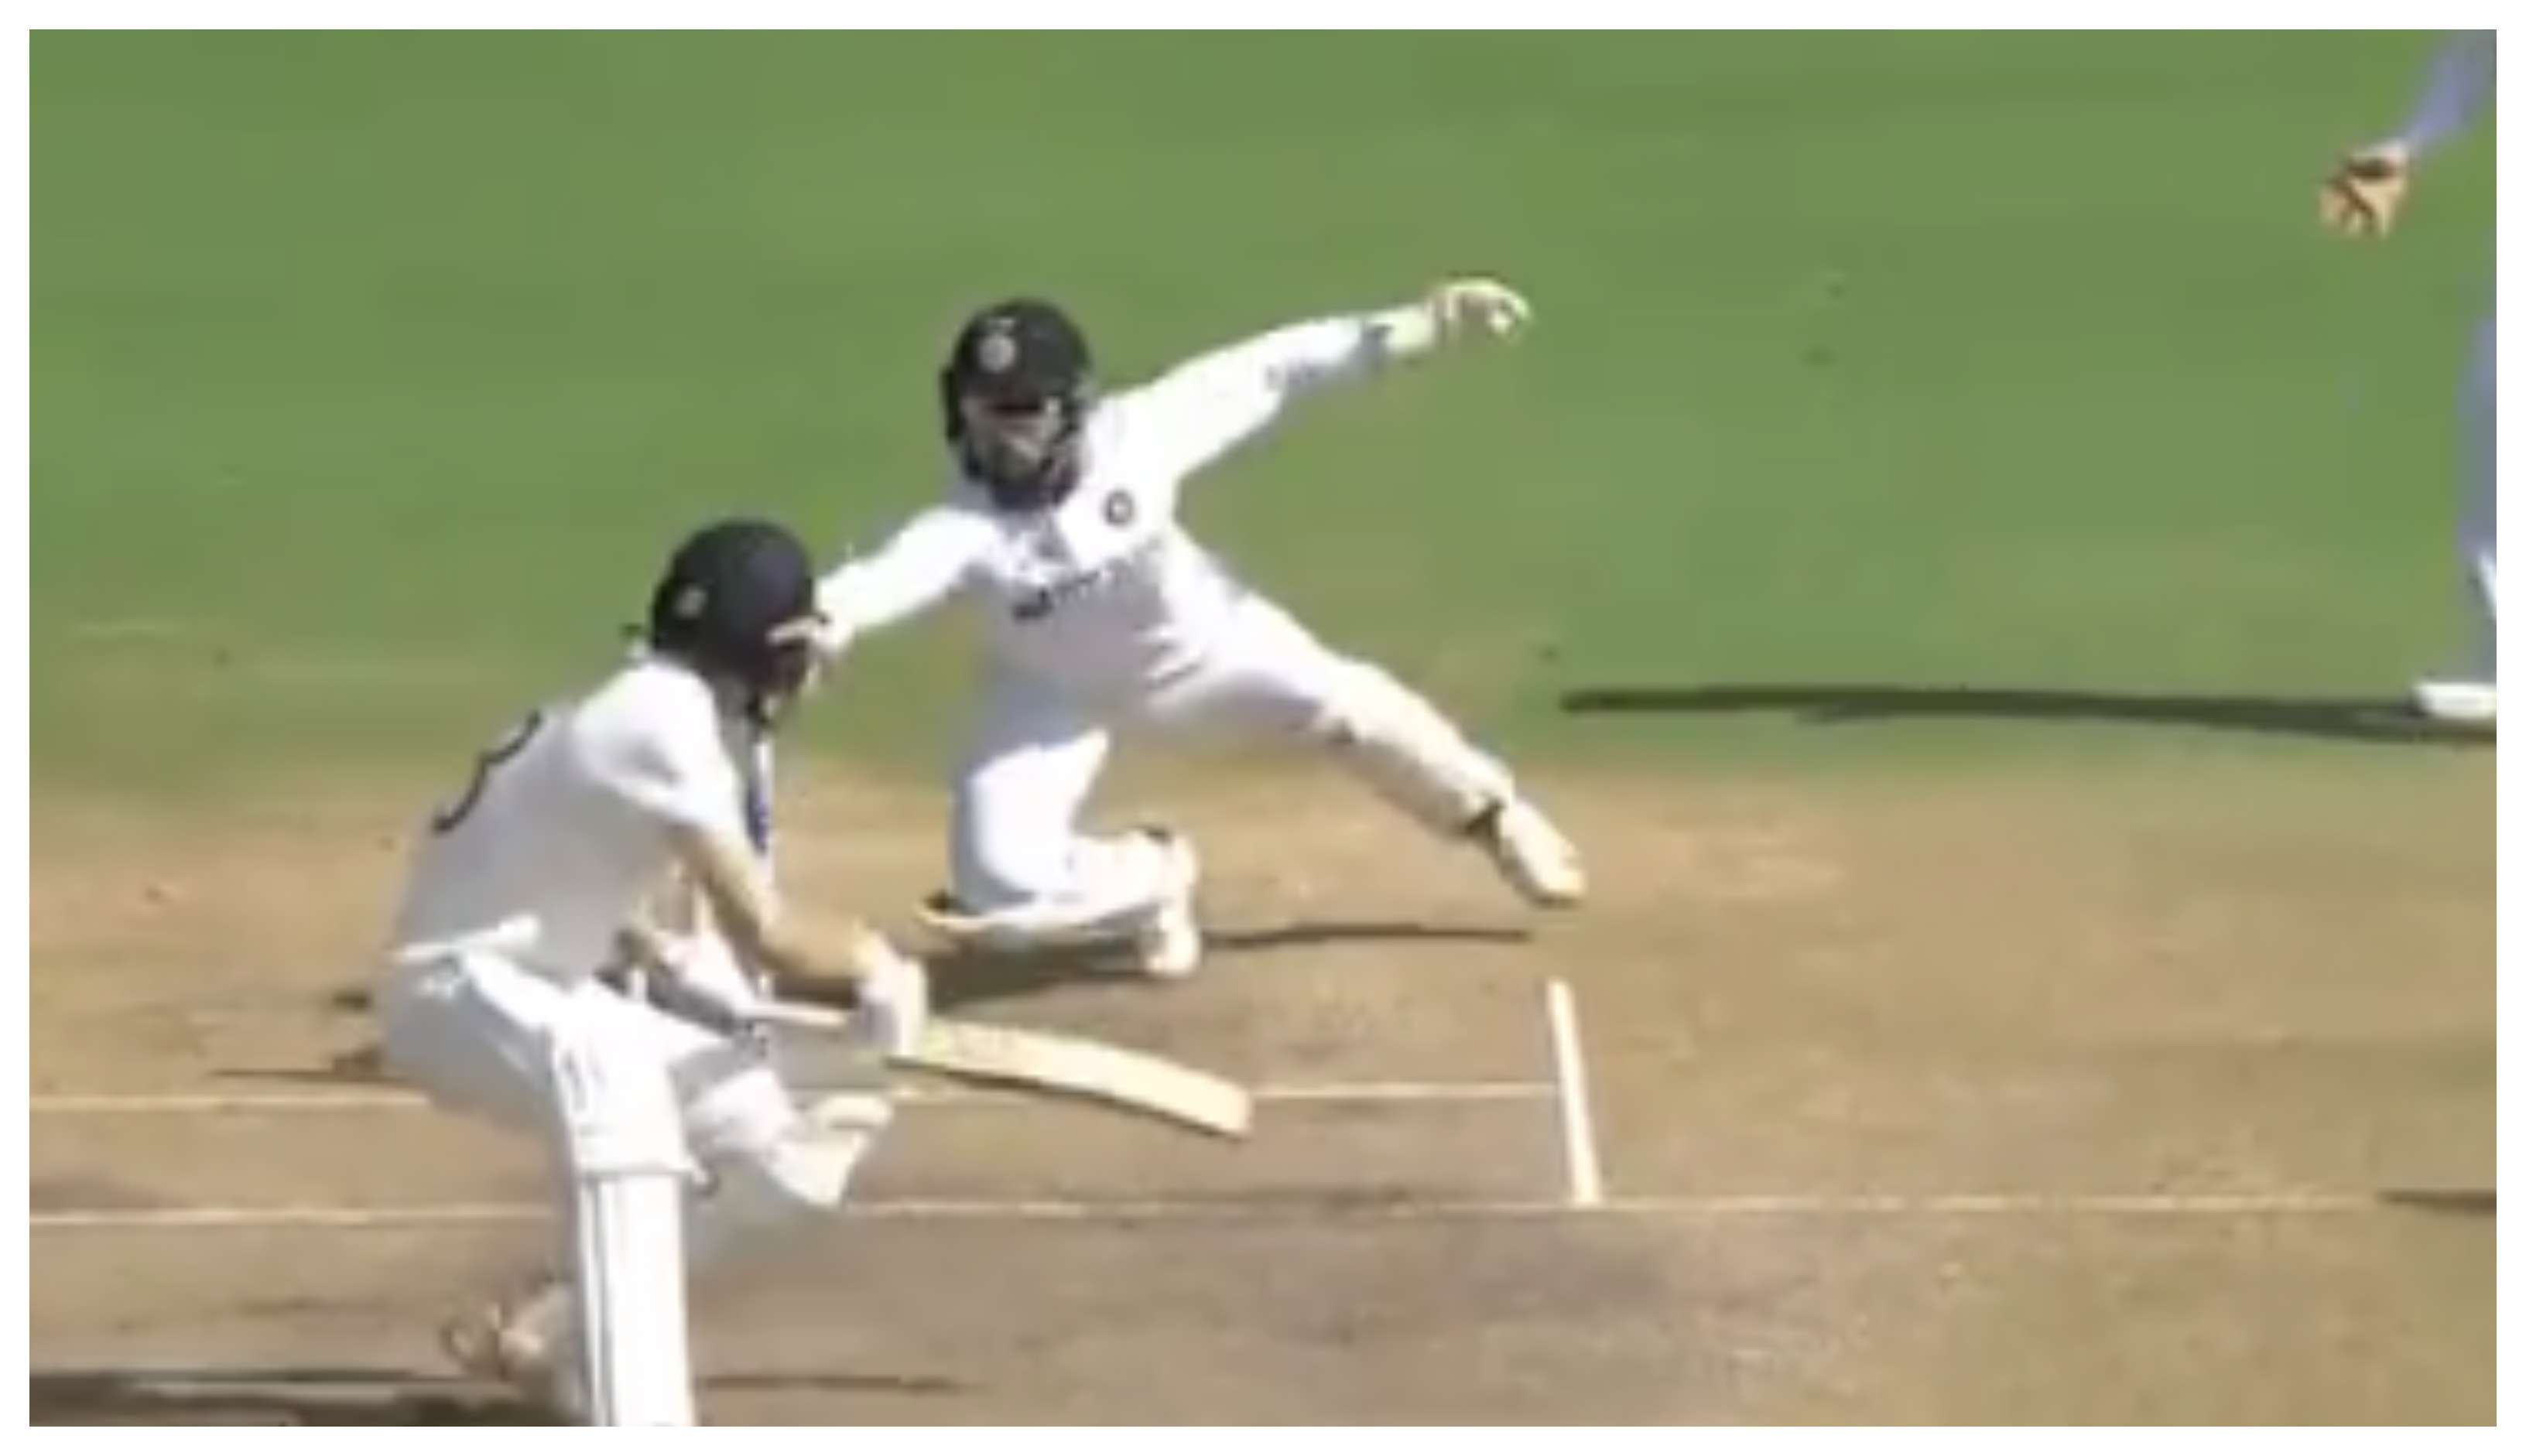 Rishabh Pant has been brilliant behind the stumps in the second Test | Screengrab